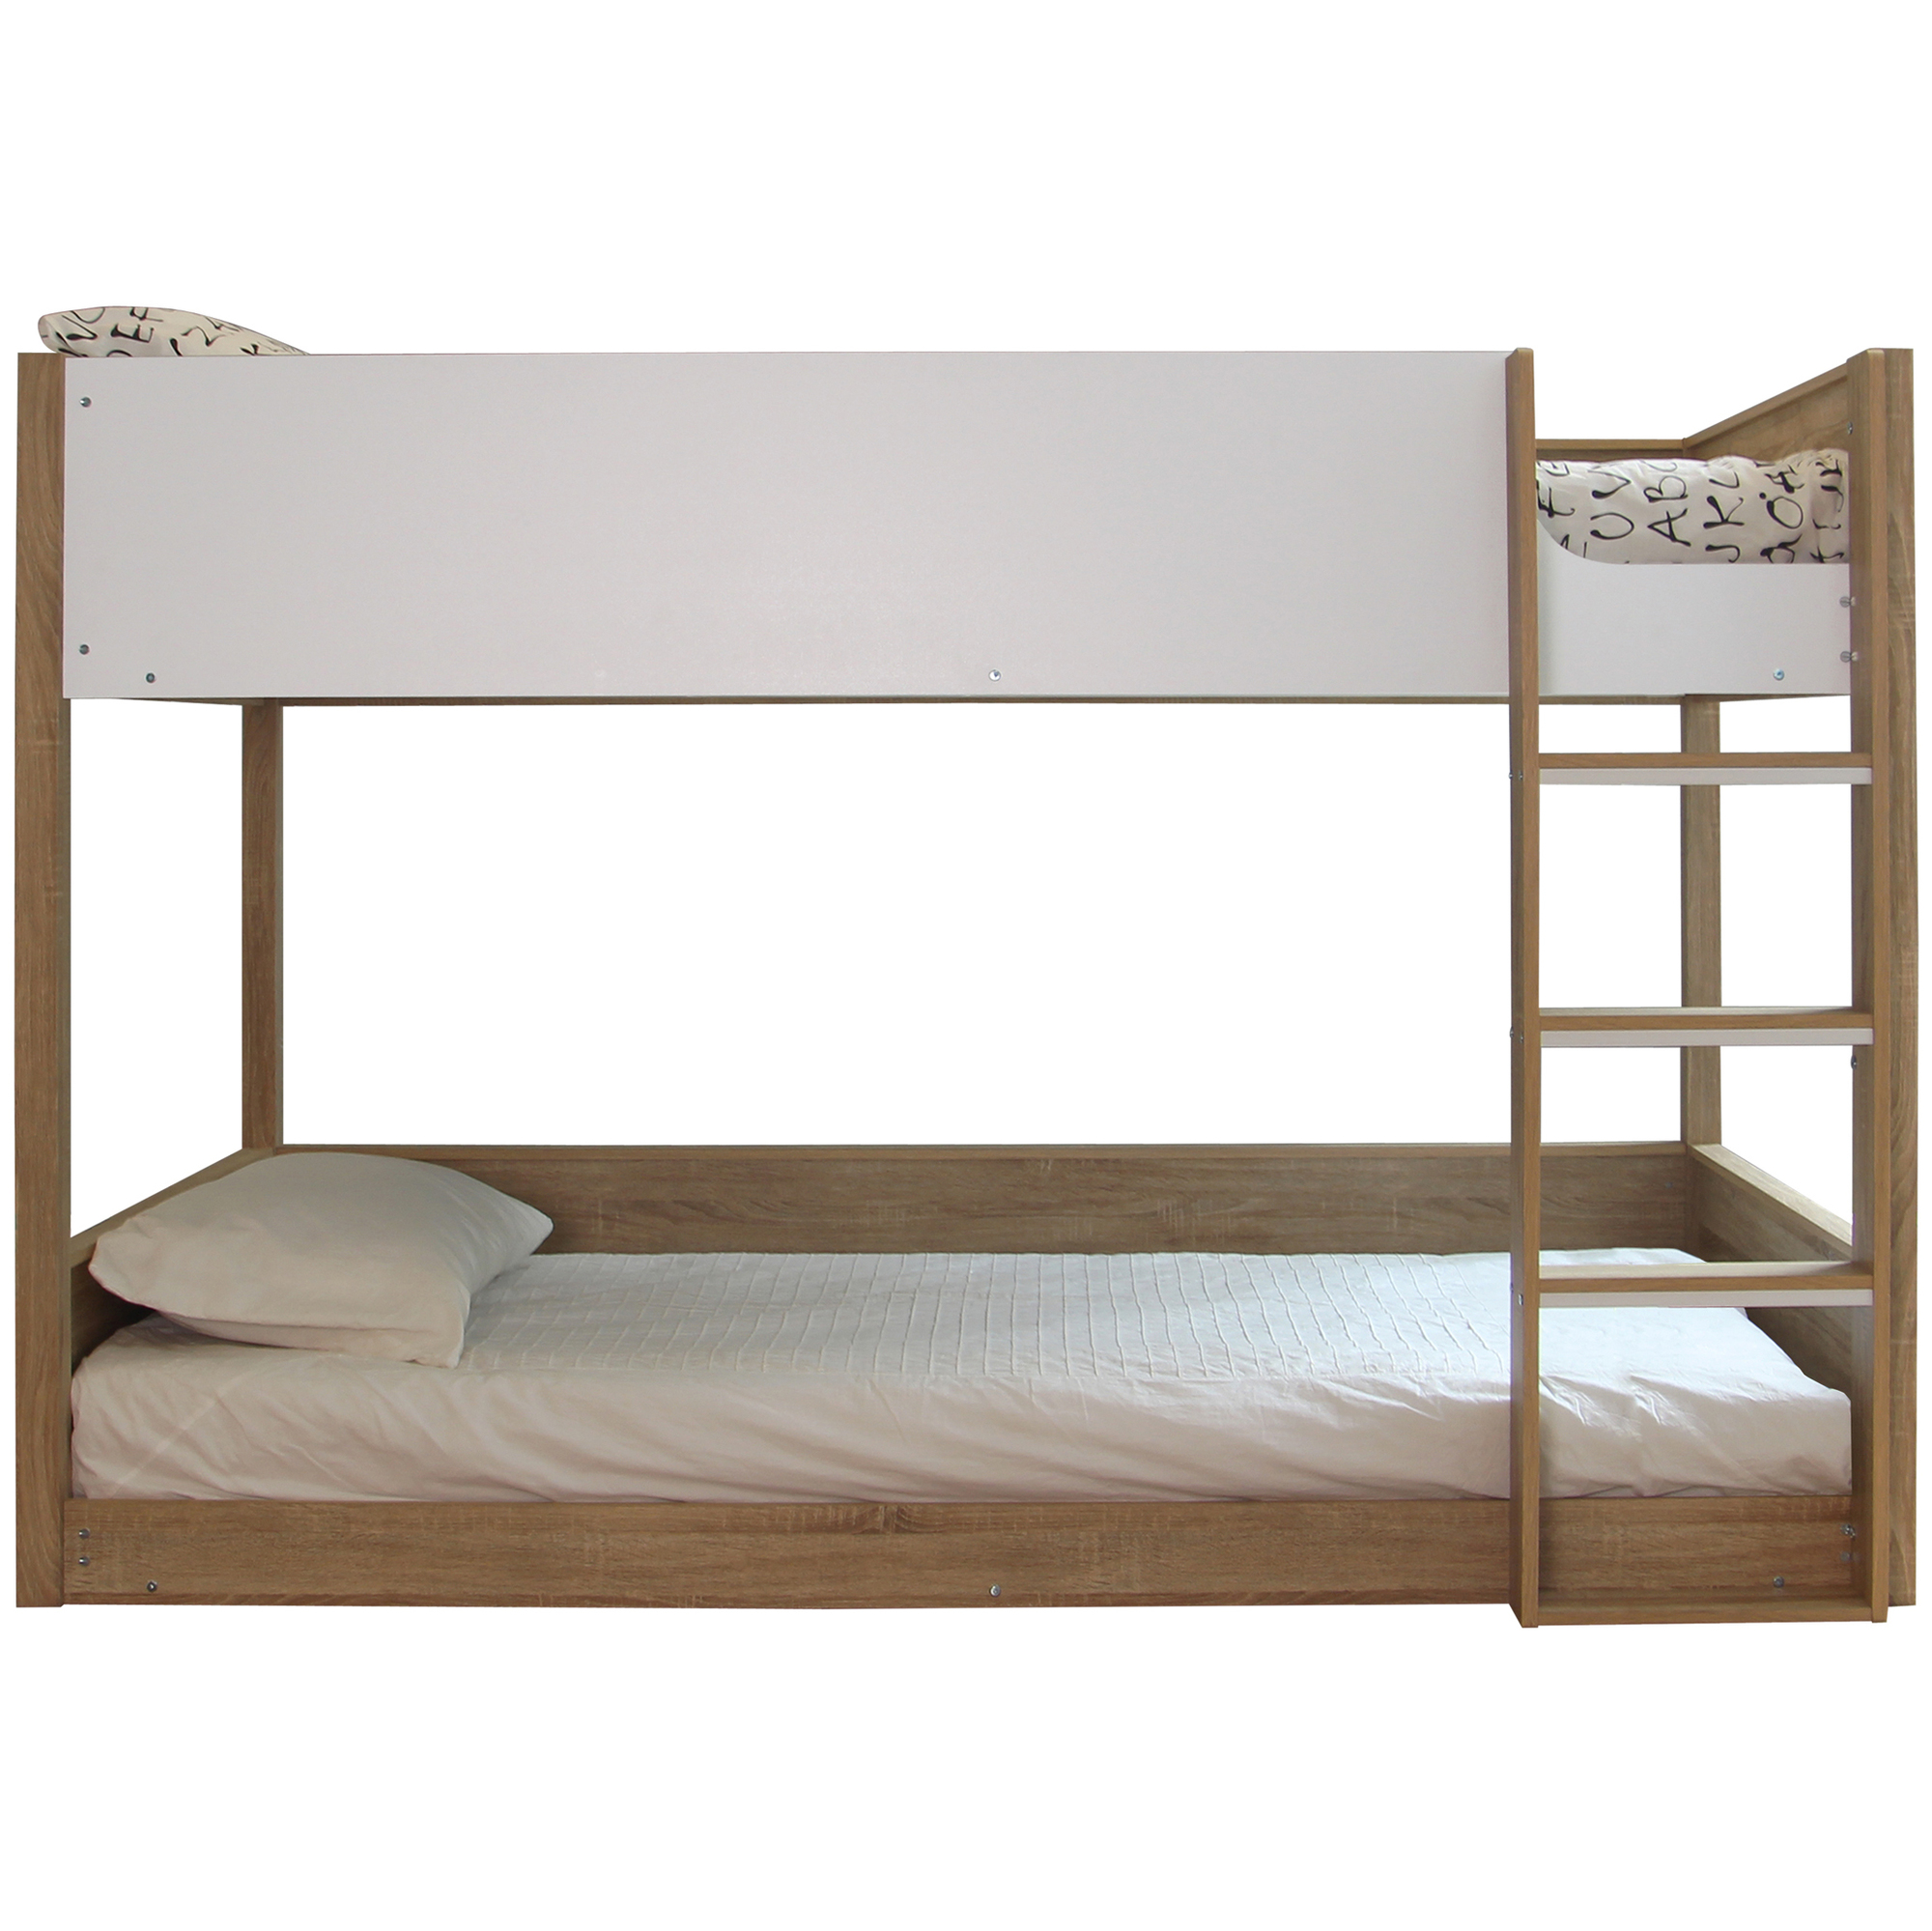 Charlie Bunk Low Line King Single, The Bunk Bed King